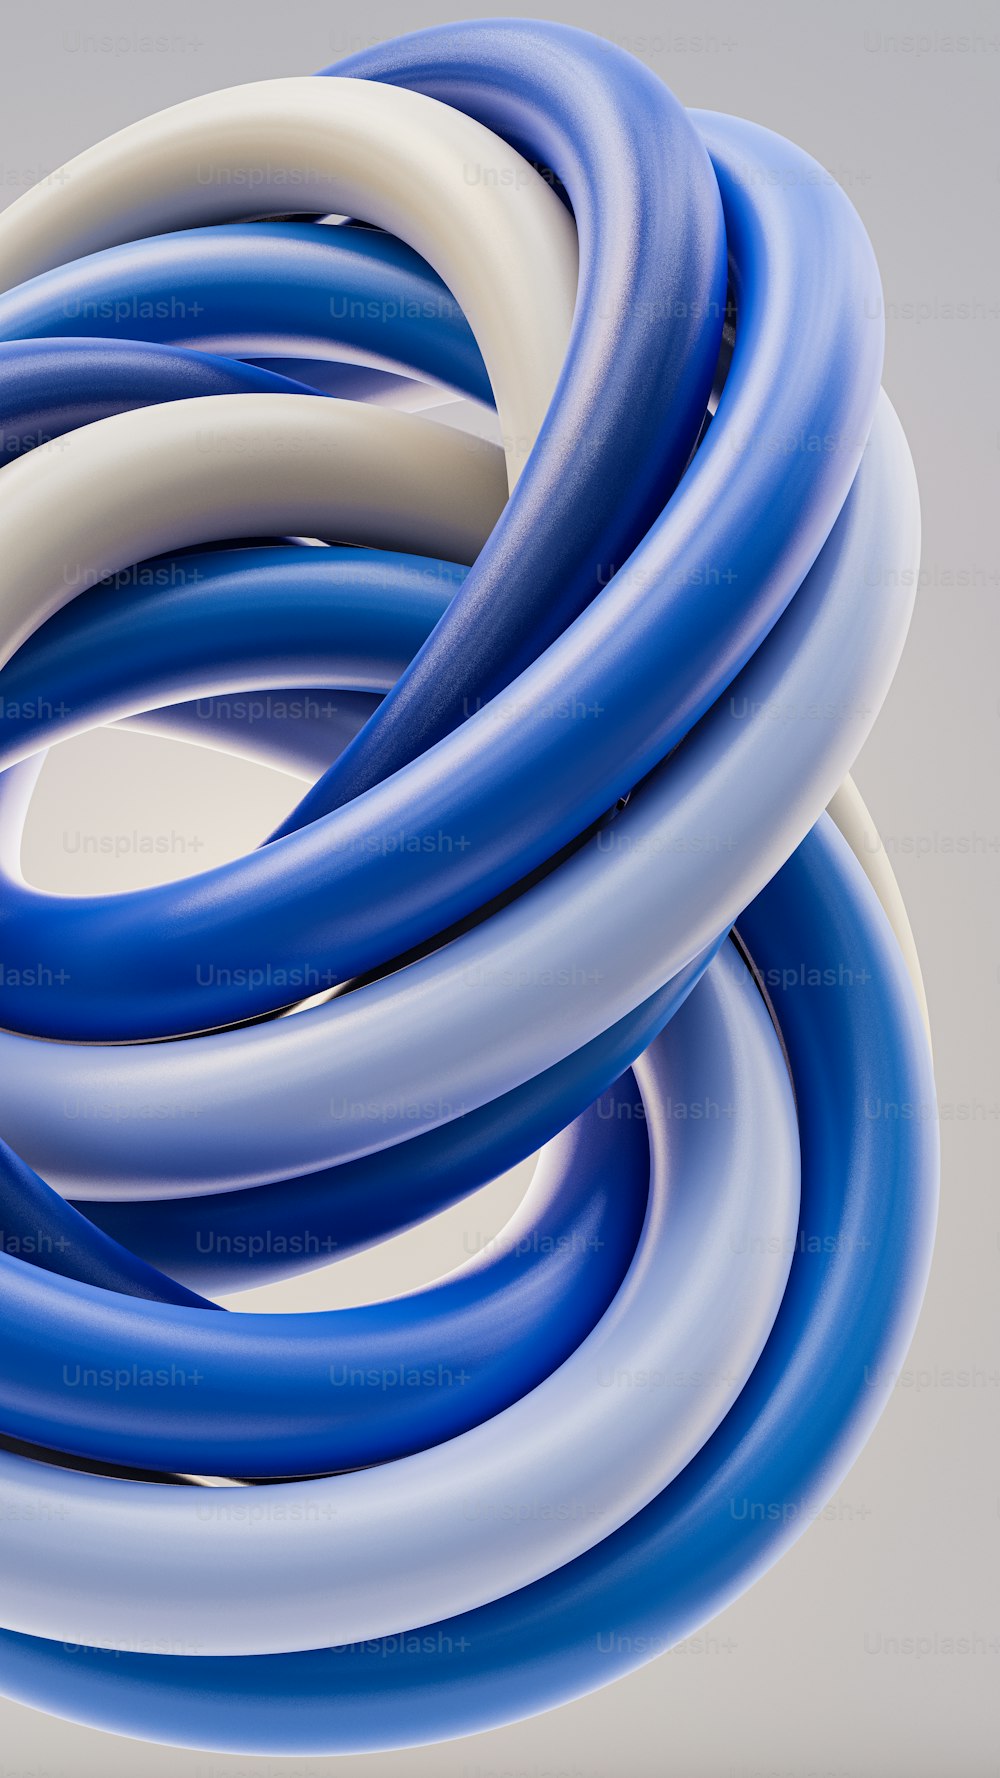 a group of blue and white hoses laying on top of each other